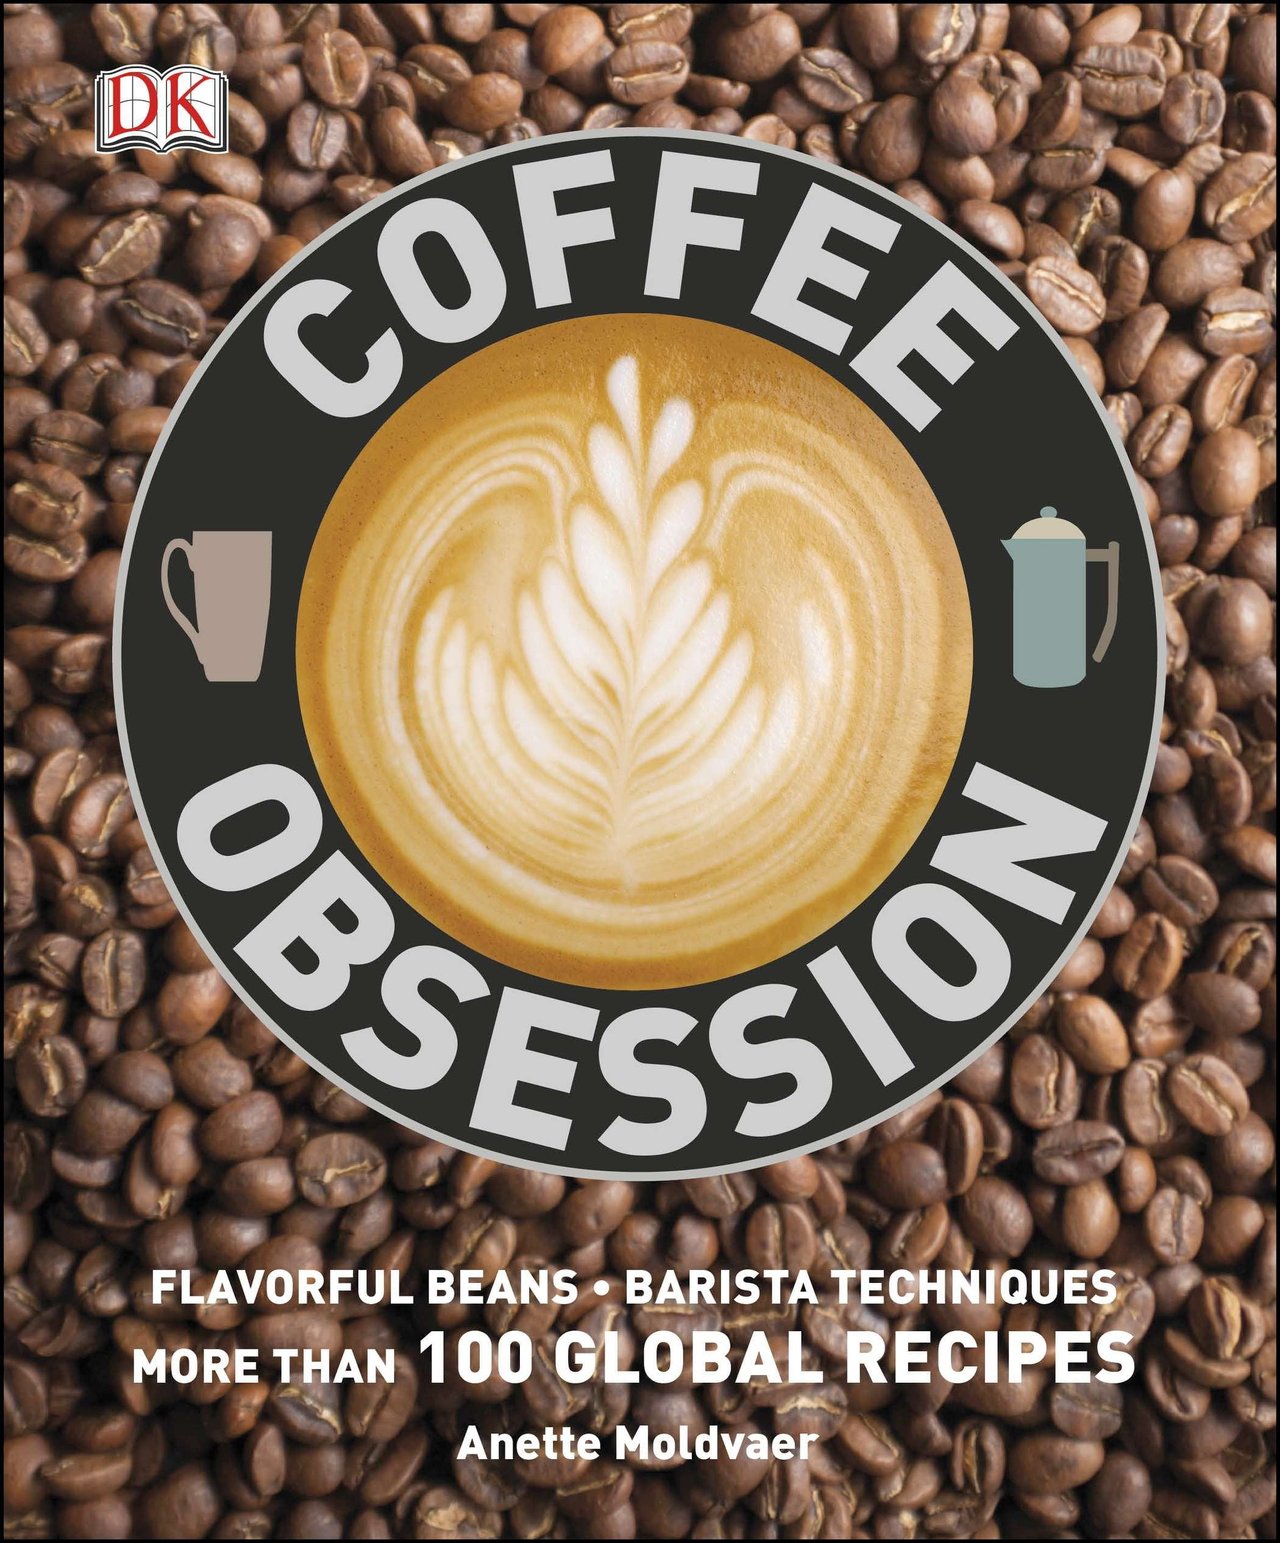 3 Coffee Obsession - by  DK (Hardcover)